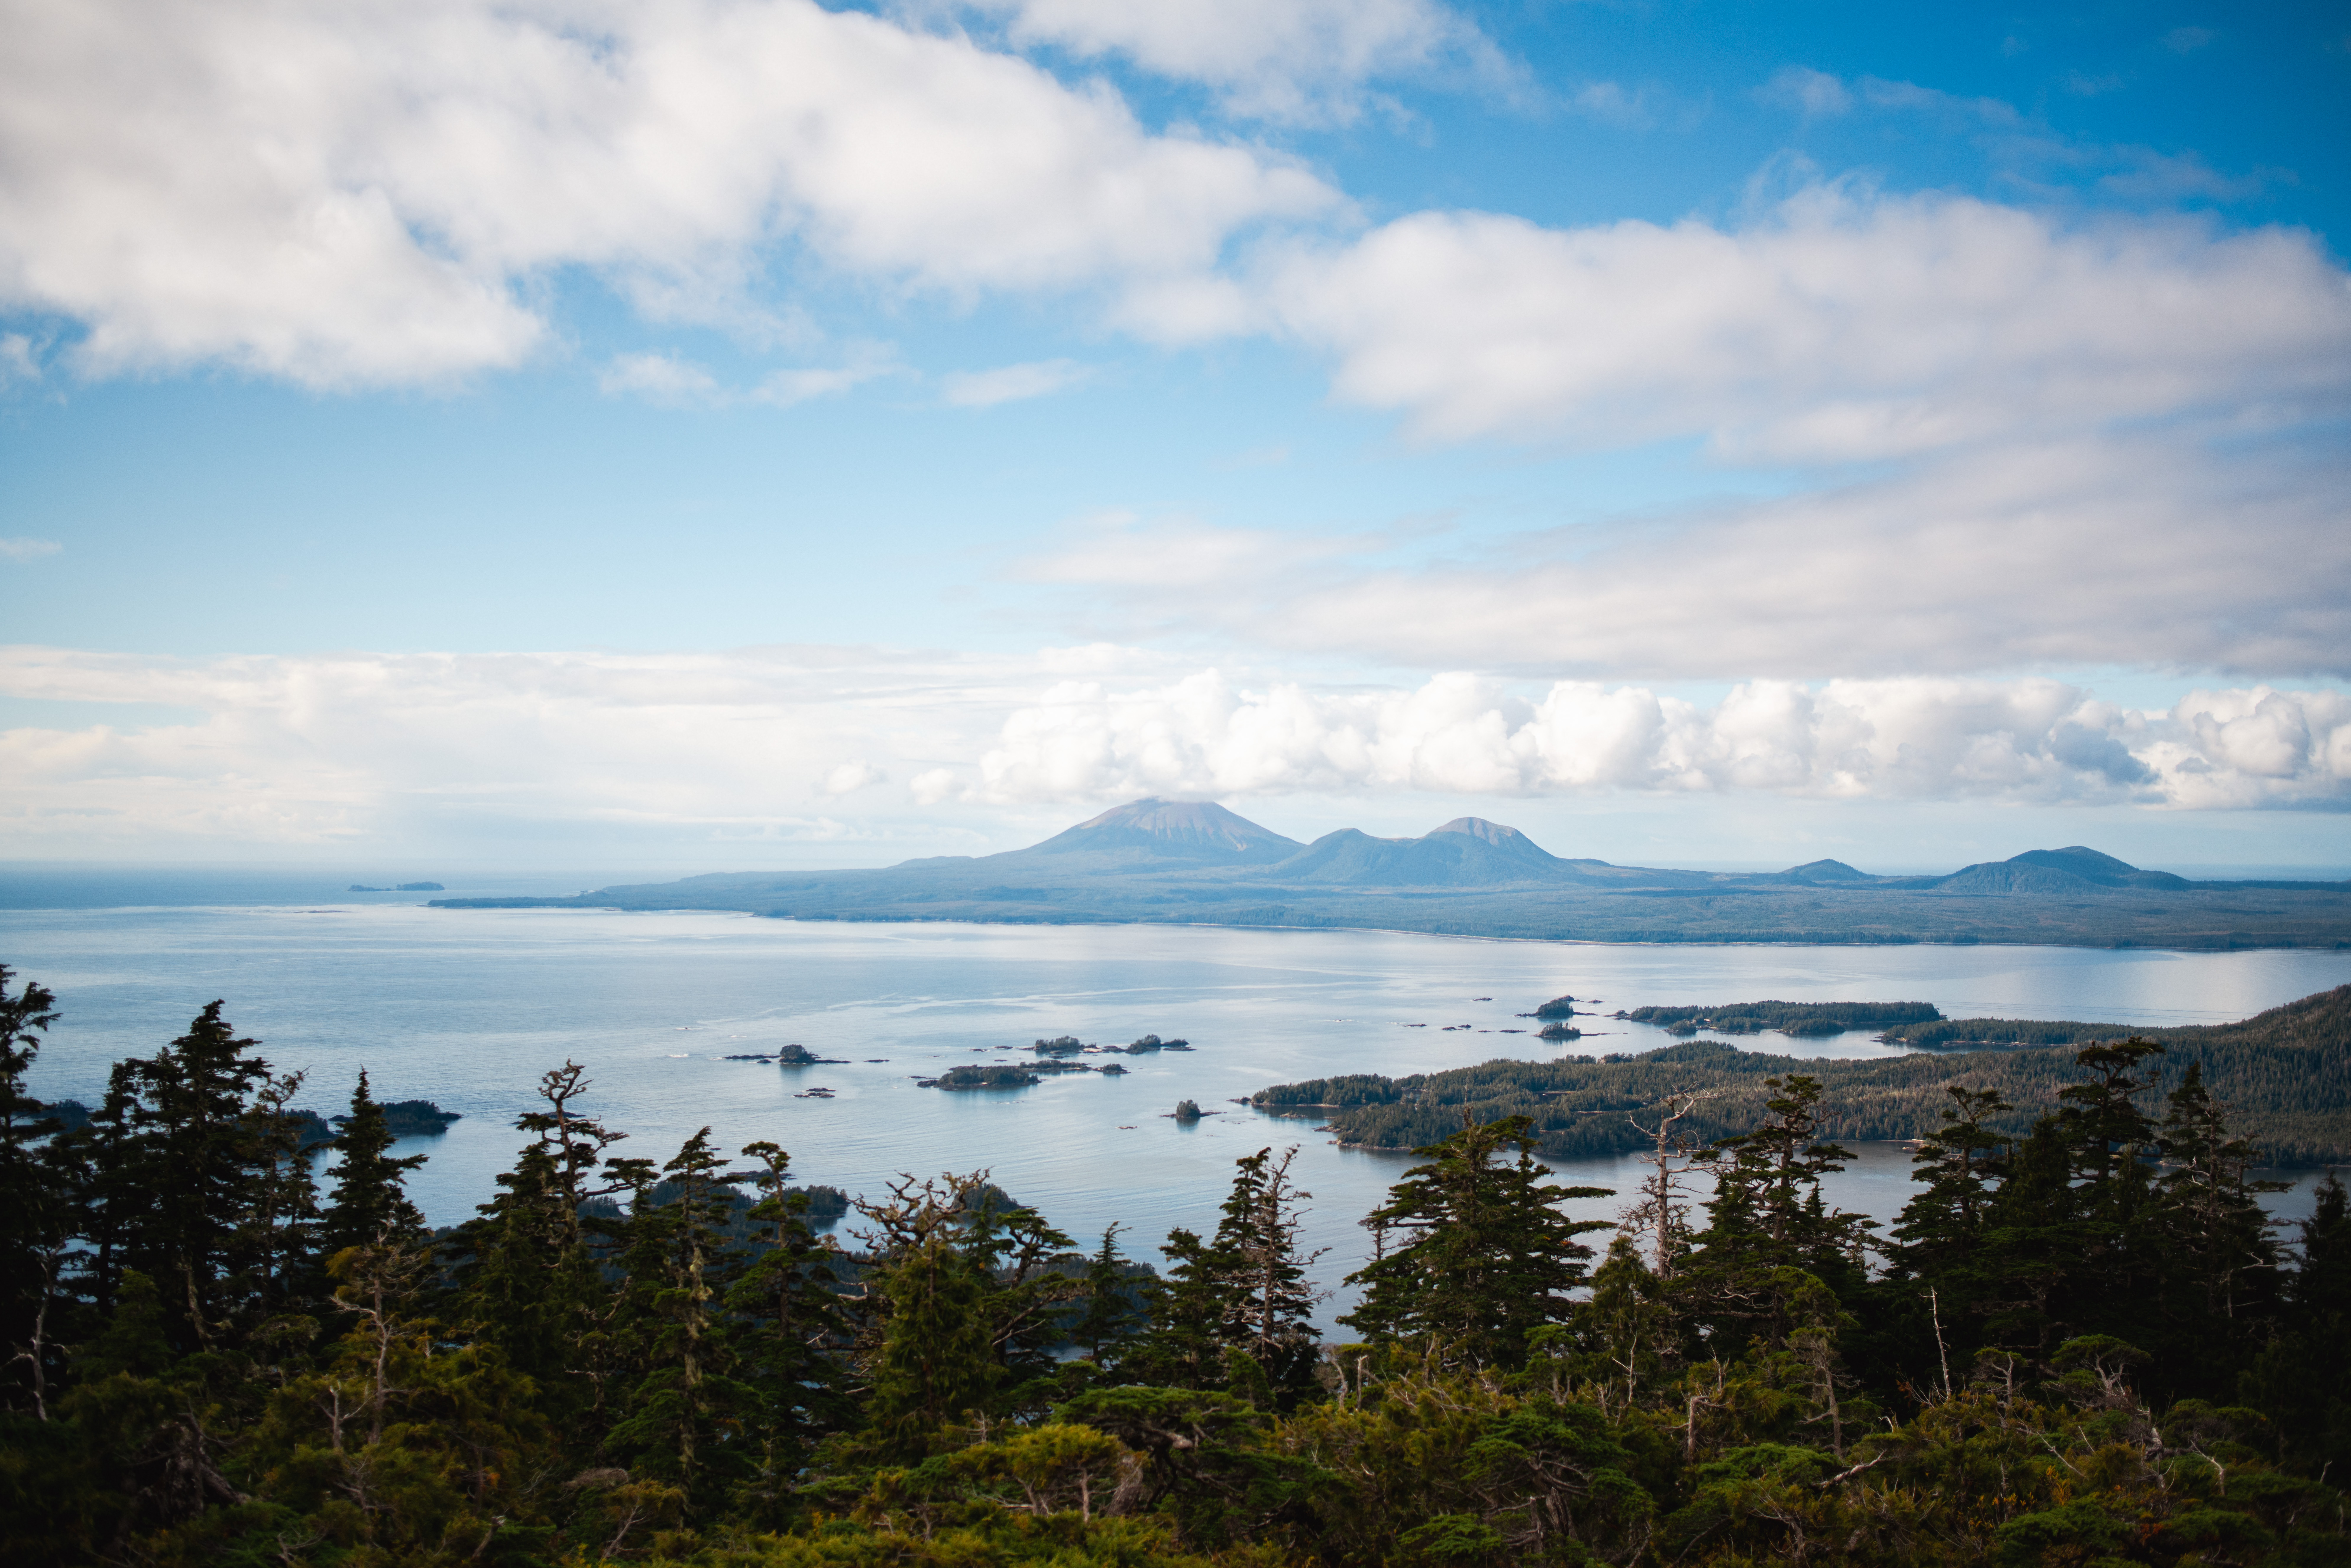 View from the summit of Harbor Mountain. Kruzof Island and Mt. Edgecumbe can be seen across the sound.